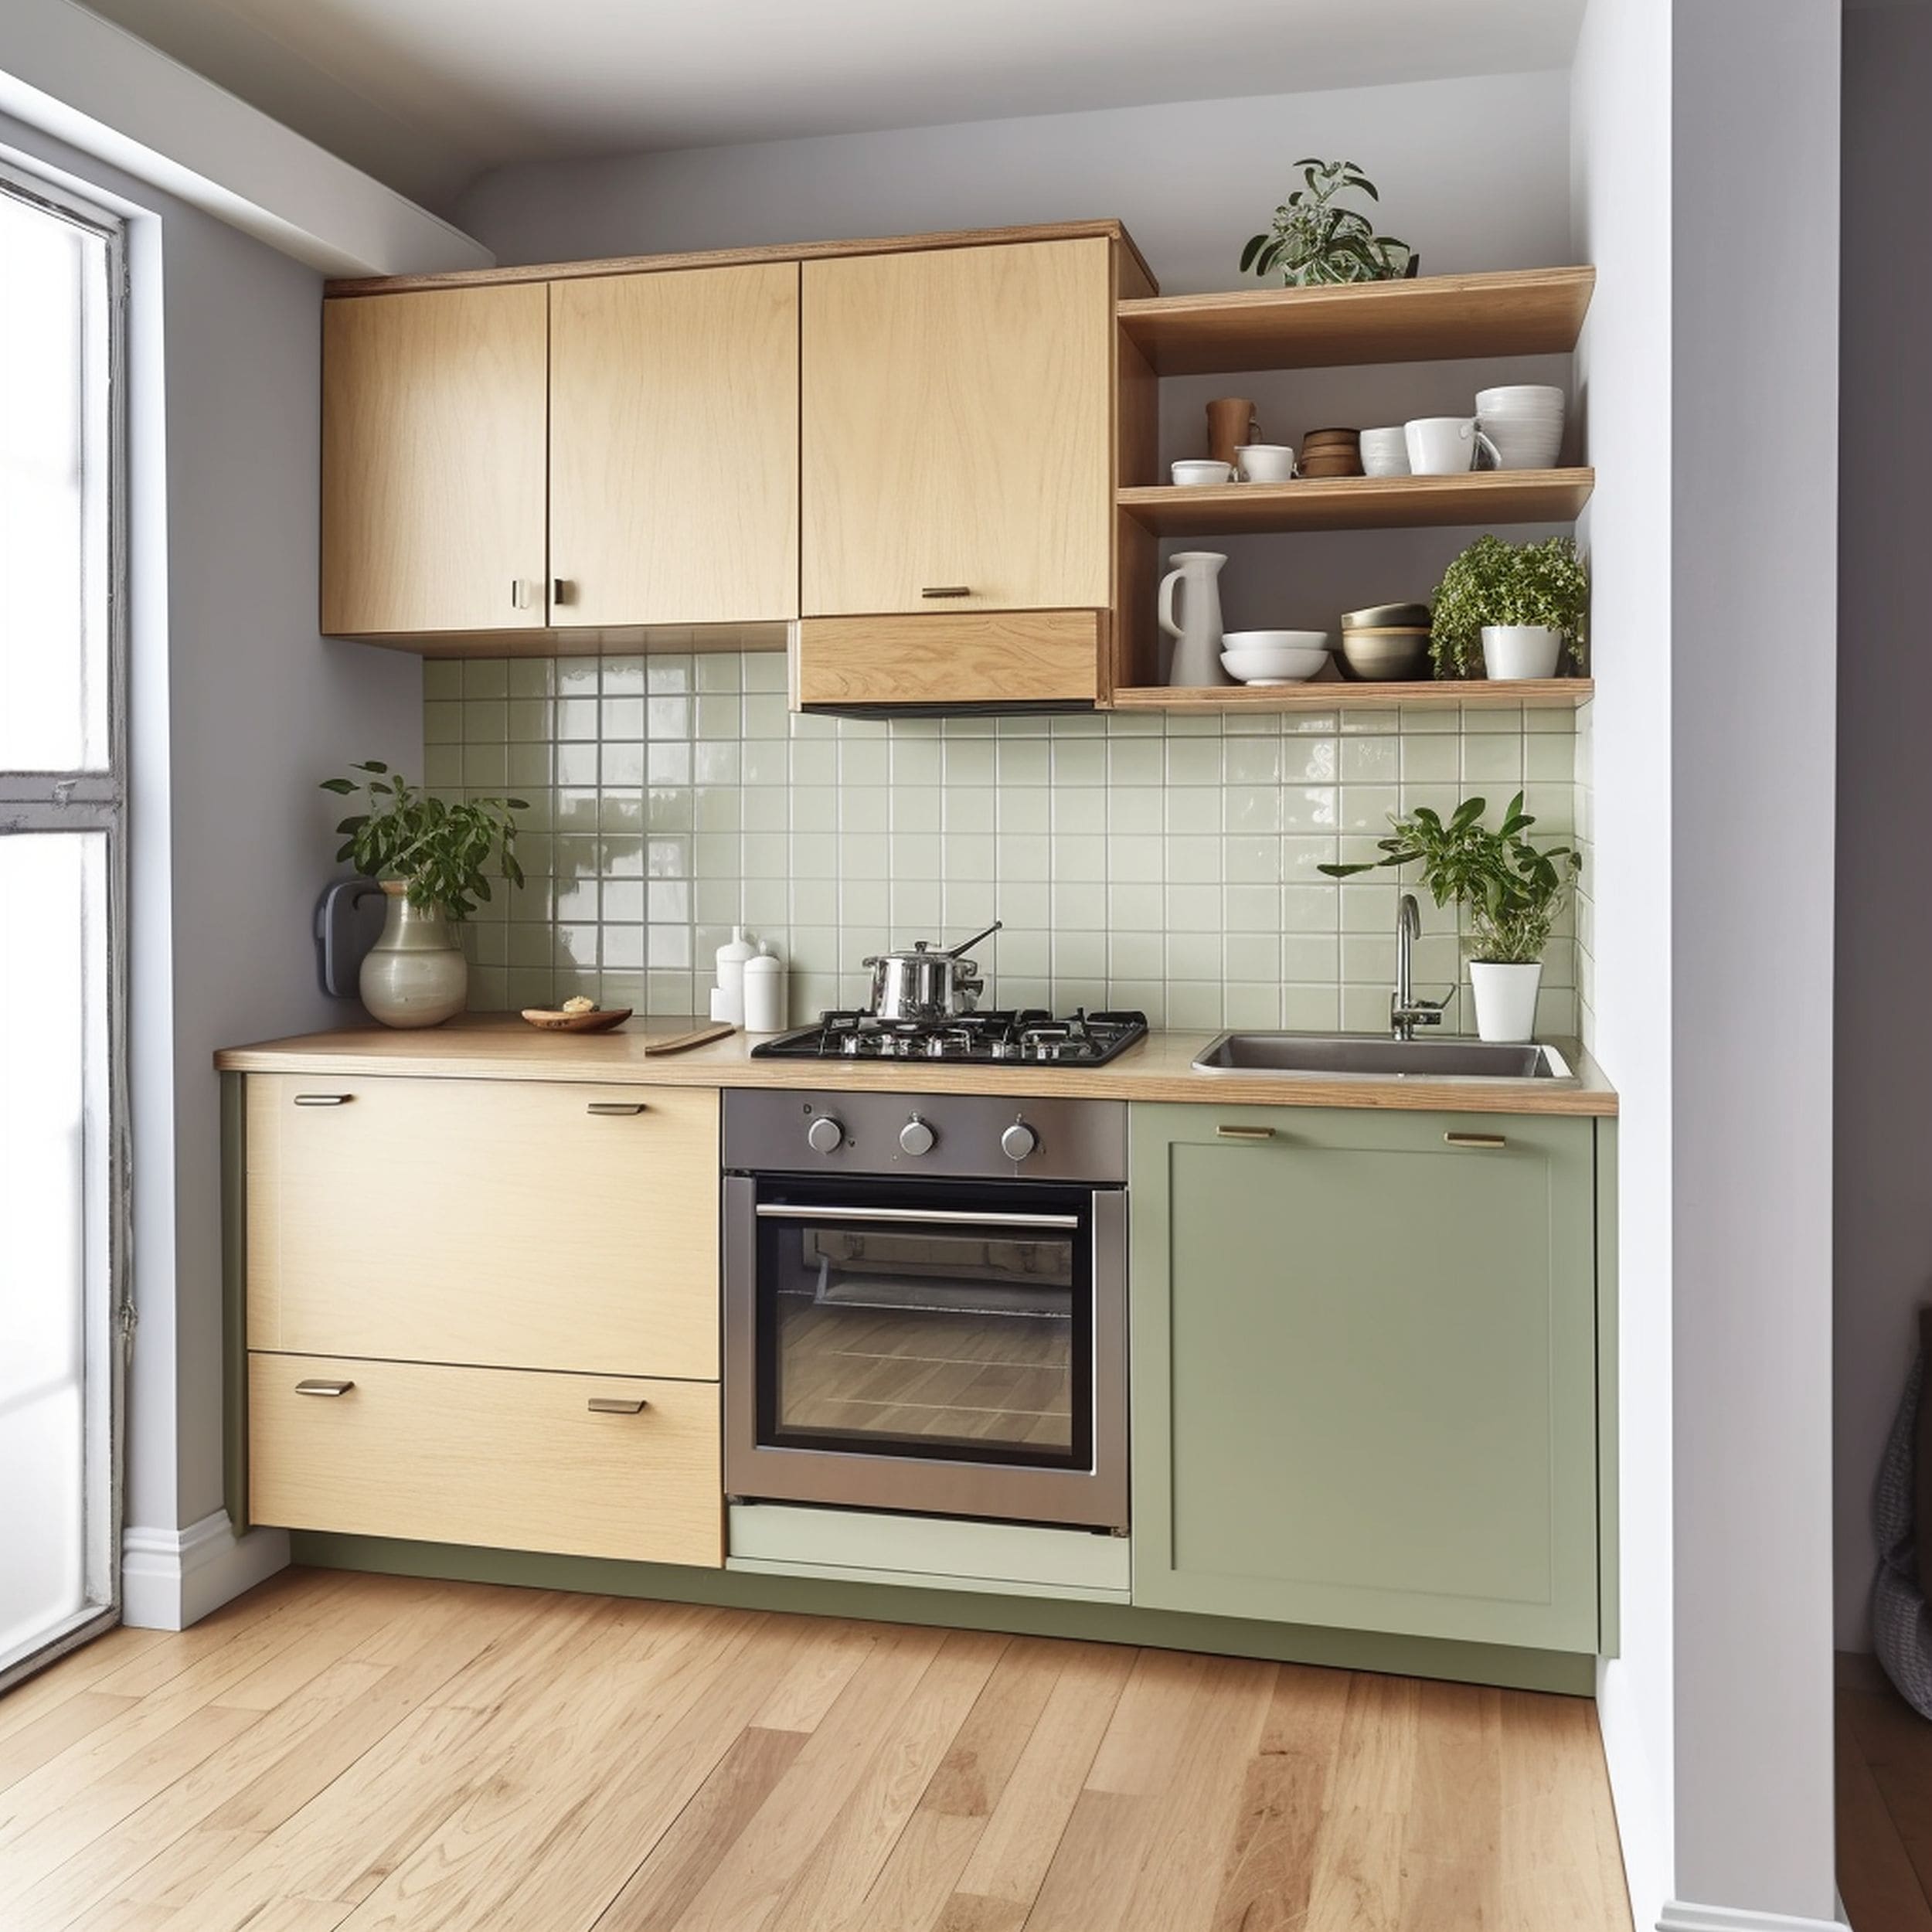 Kitchen With a Single Sage Green Cabinet Accent